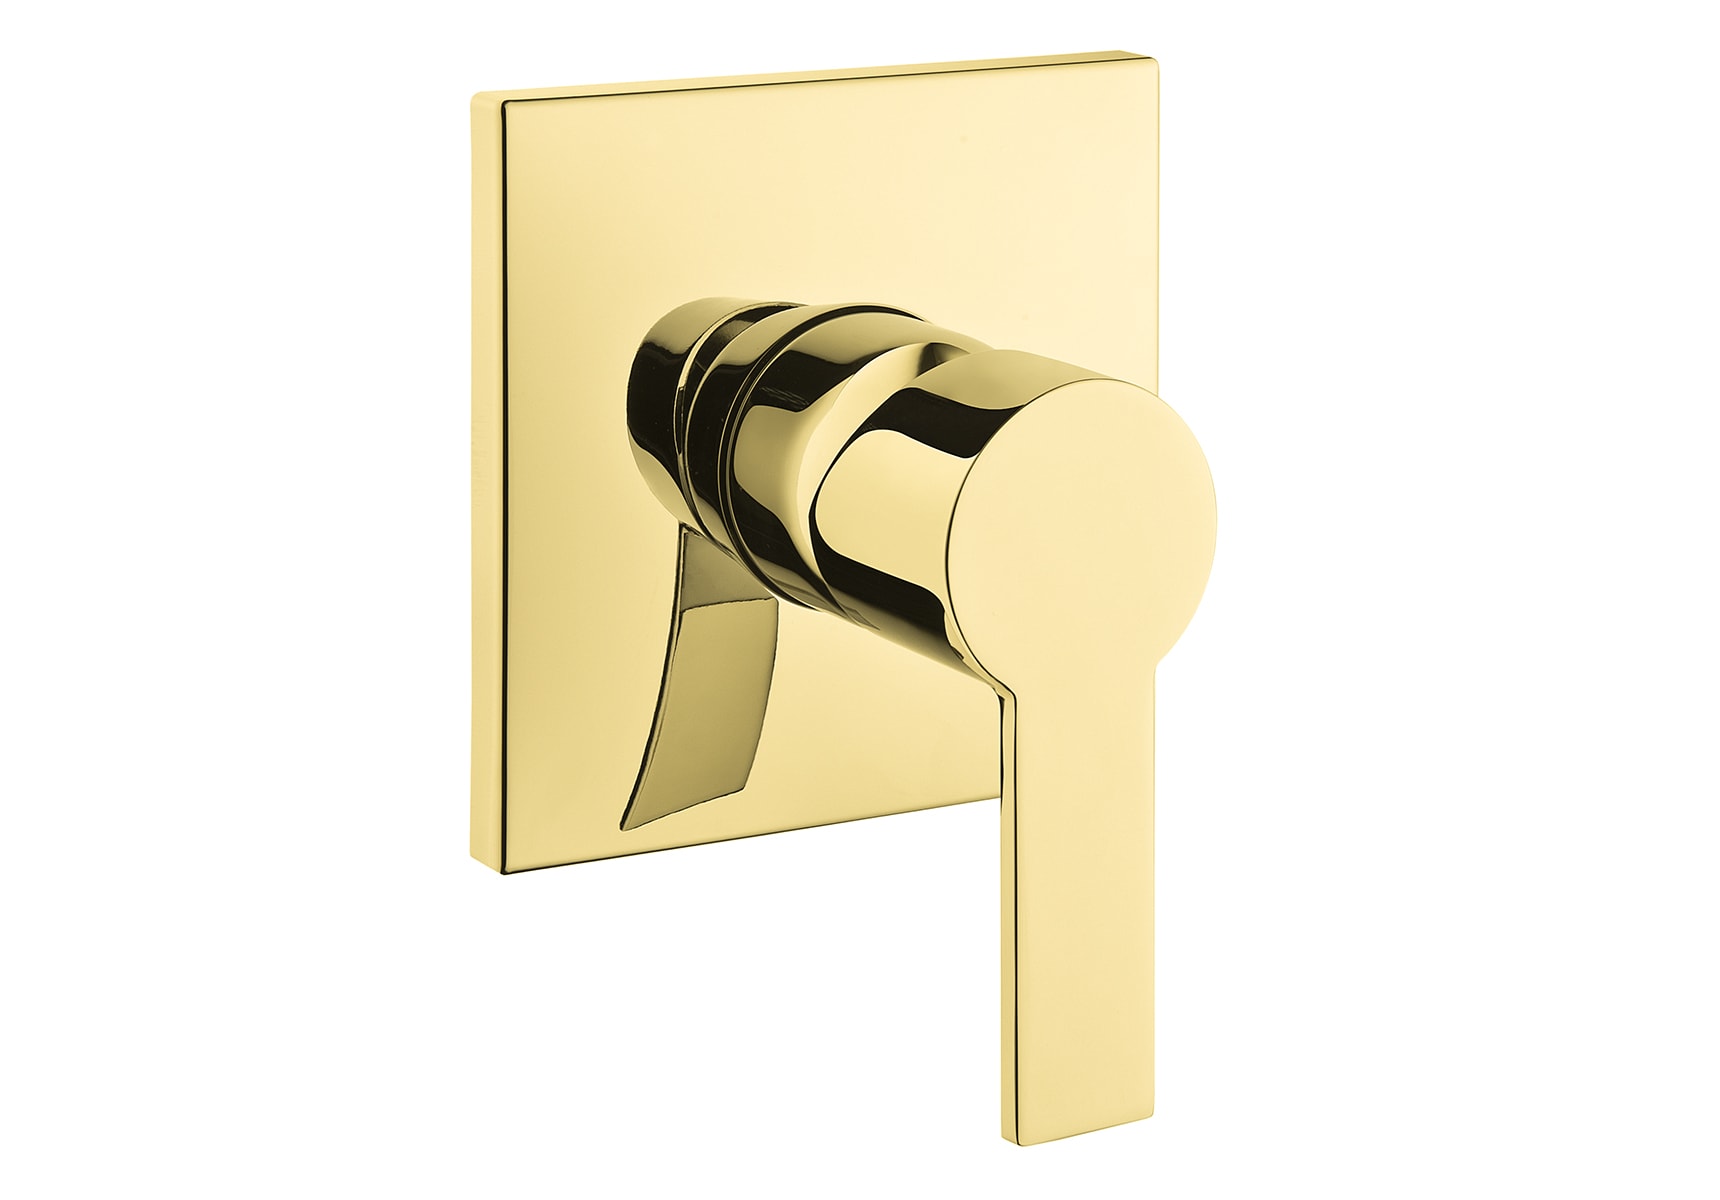 Flo S Built-In Shower Mixer, Exposed Part, Gold